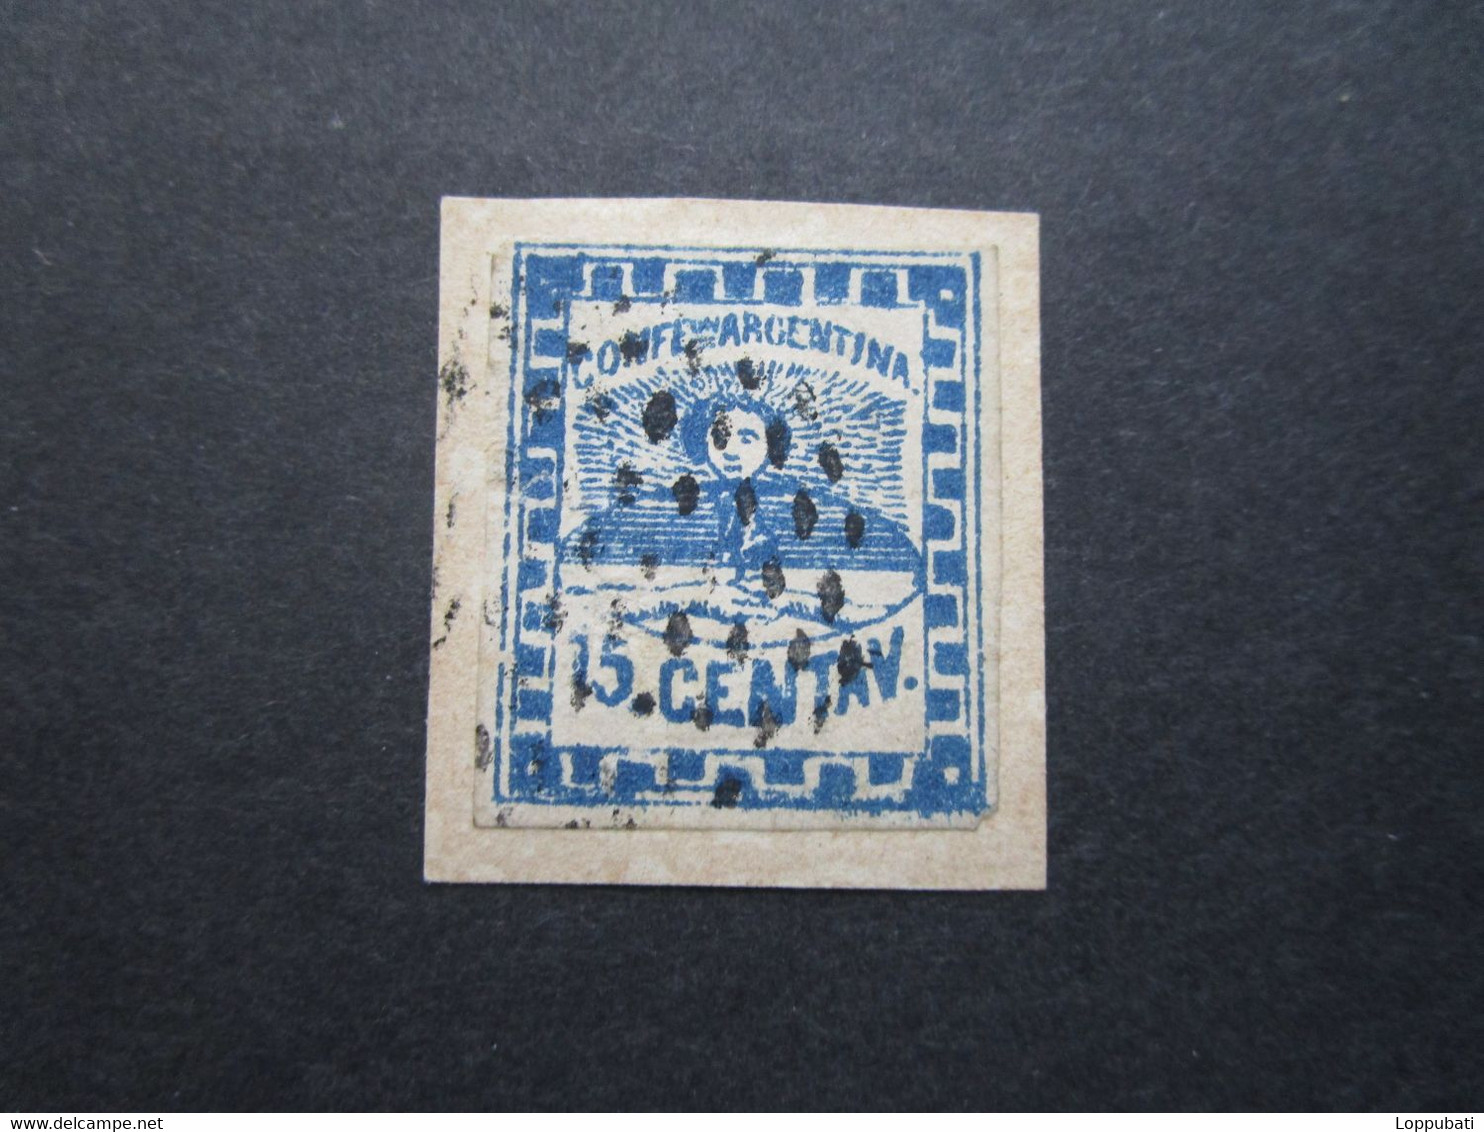 Argentinien 15 Cent 1858. Gestempelt. - Used Stamps